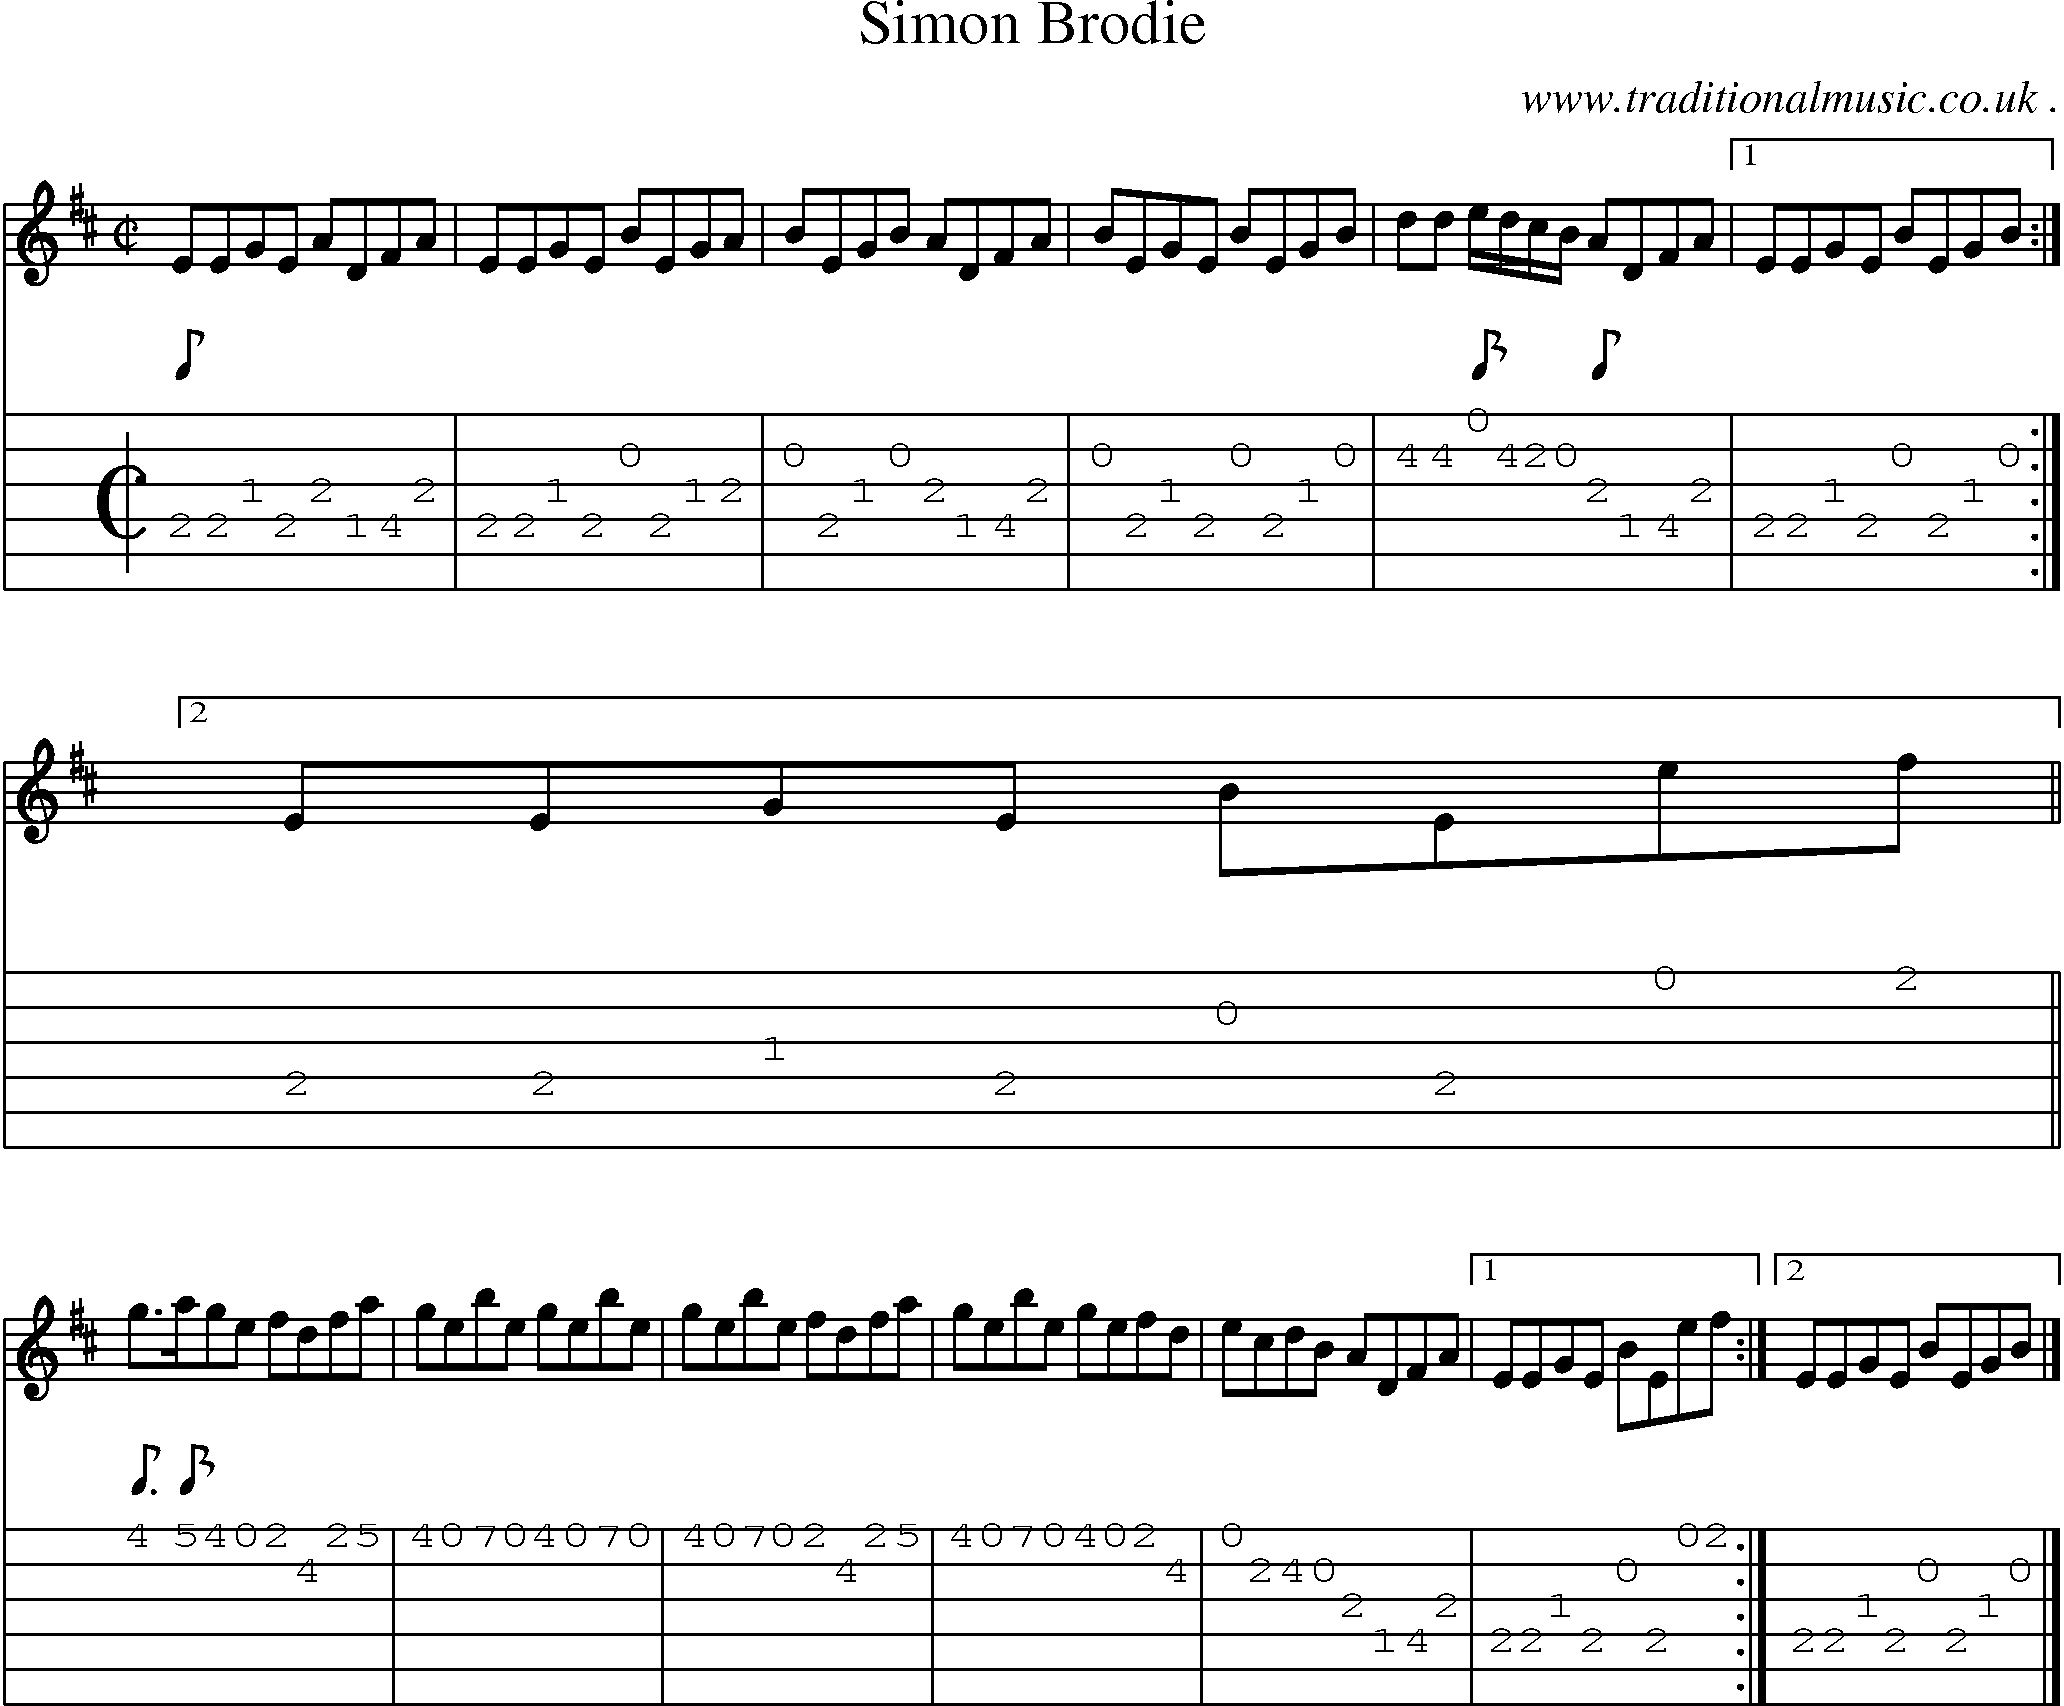 Sheet-music  score, Chords and Guitar Tabs for Simon Brodie